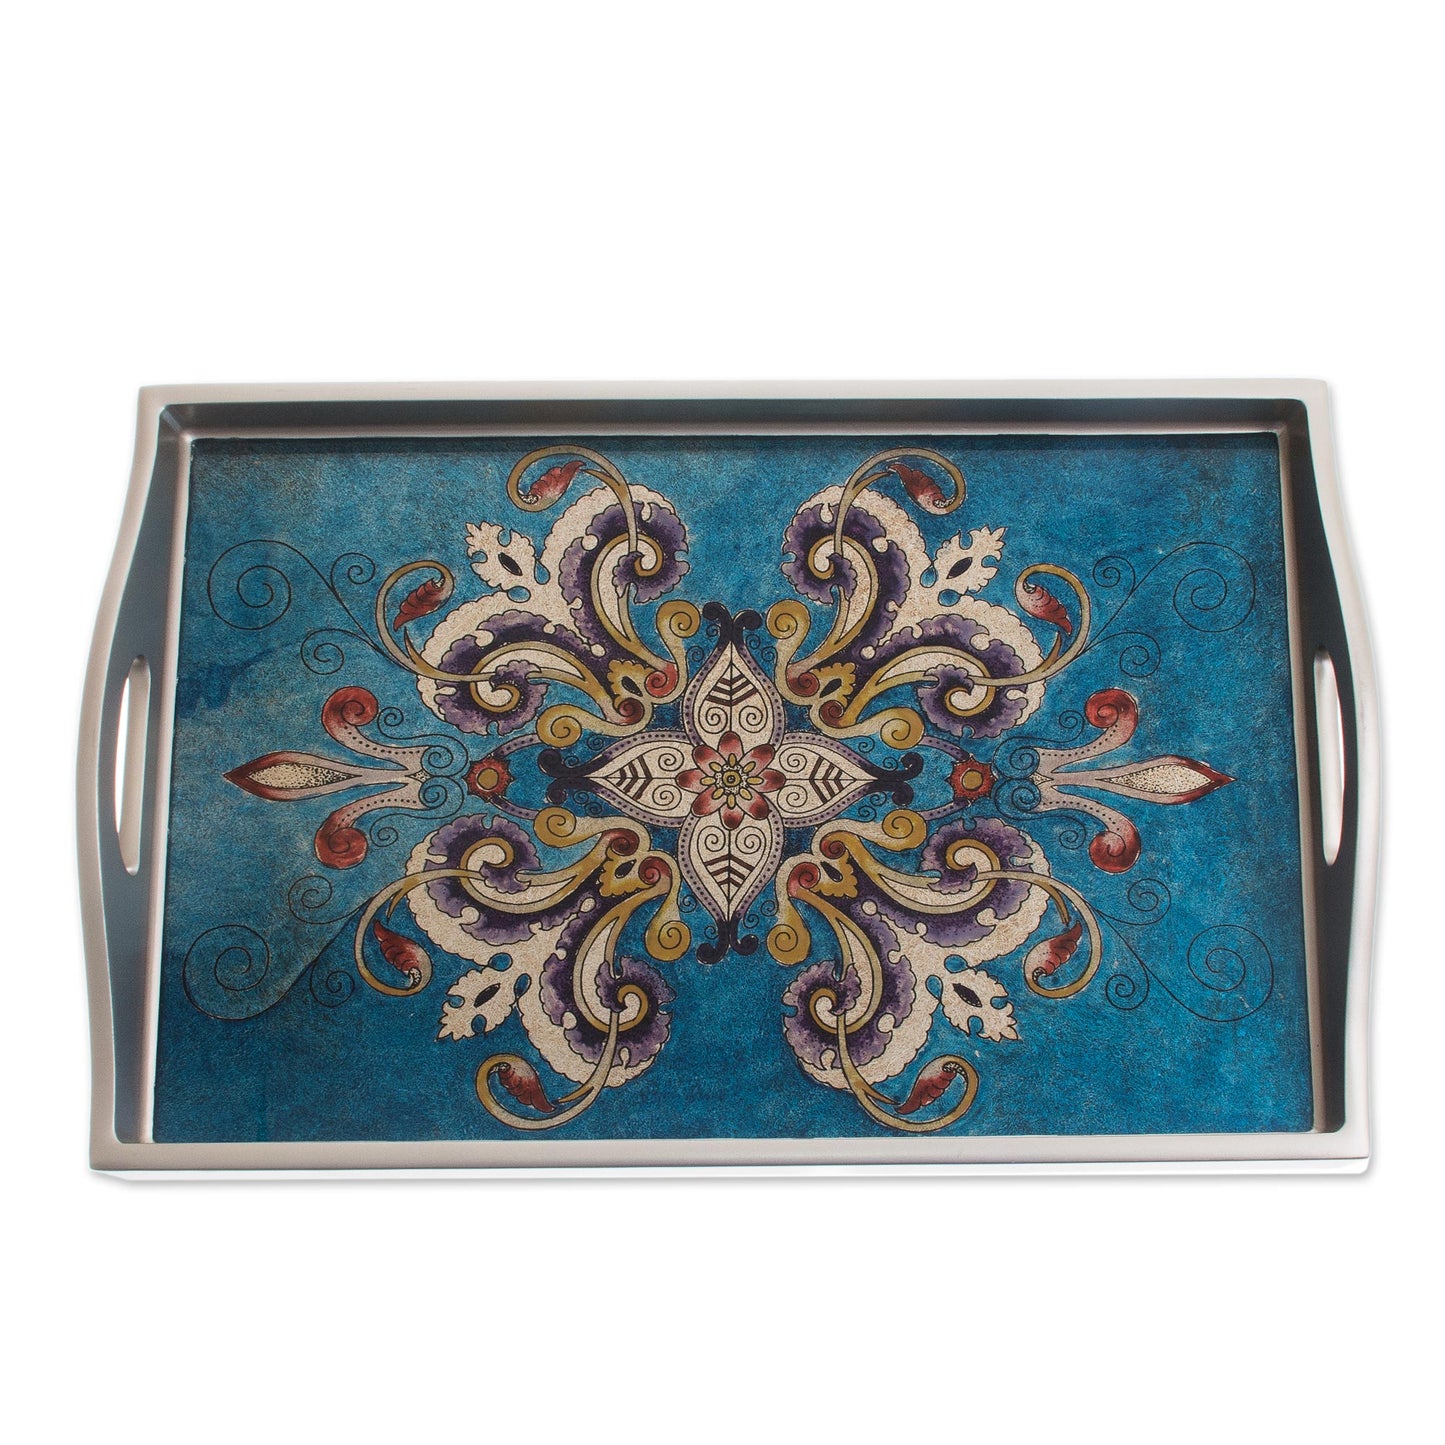 Enchanting Flowers in Blue Floral Reverse-Painted Glass Tray in Blue from Peru